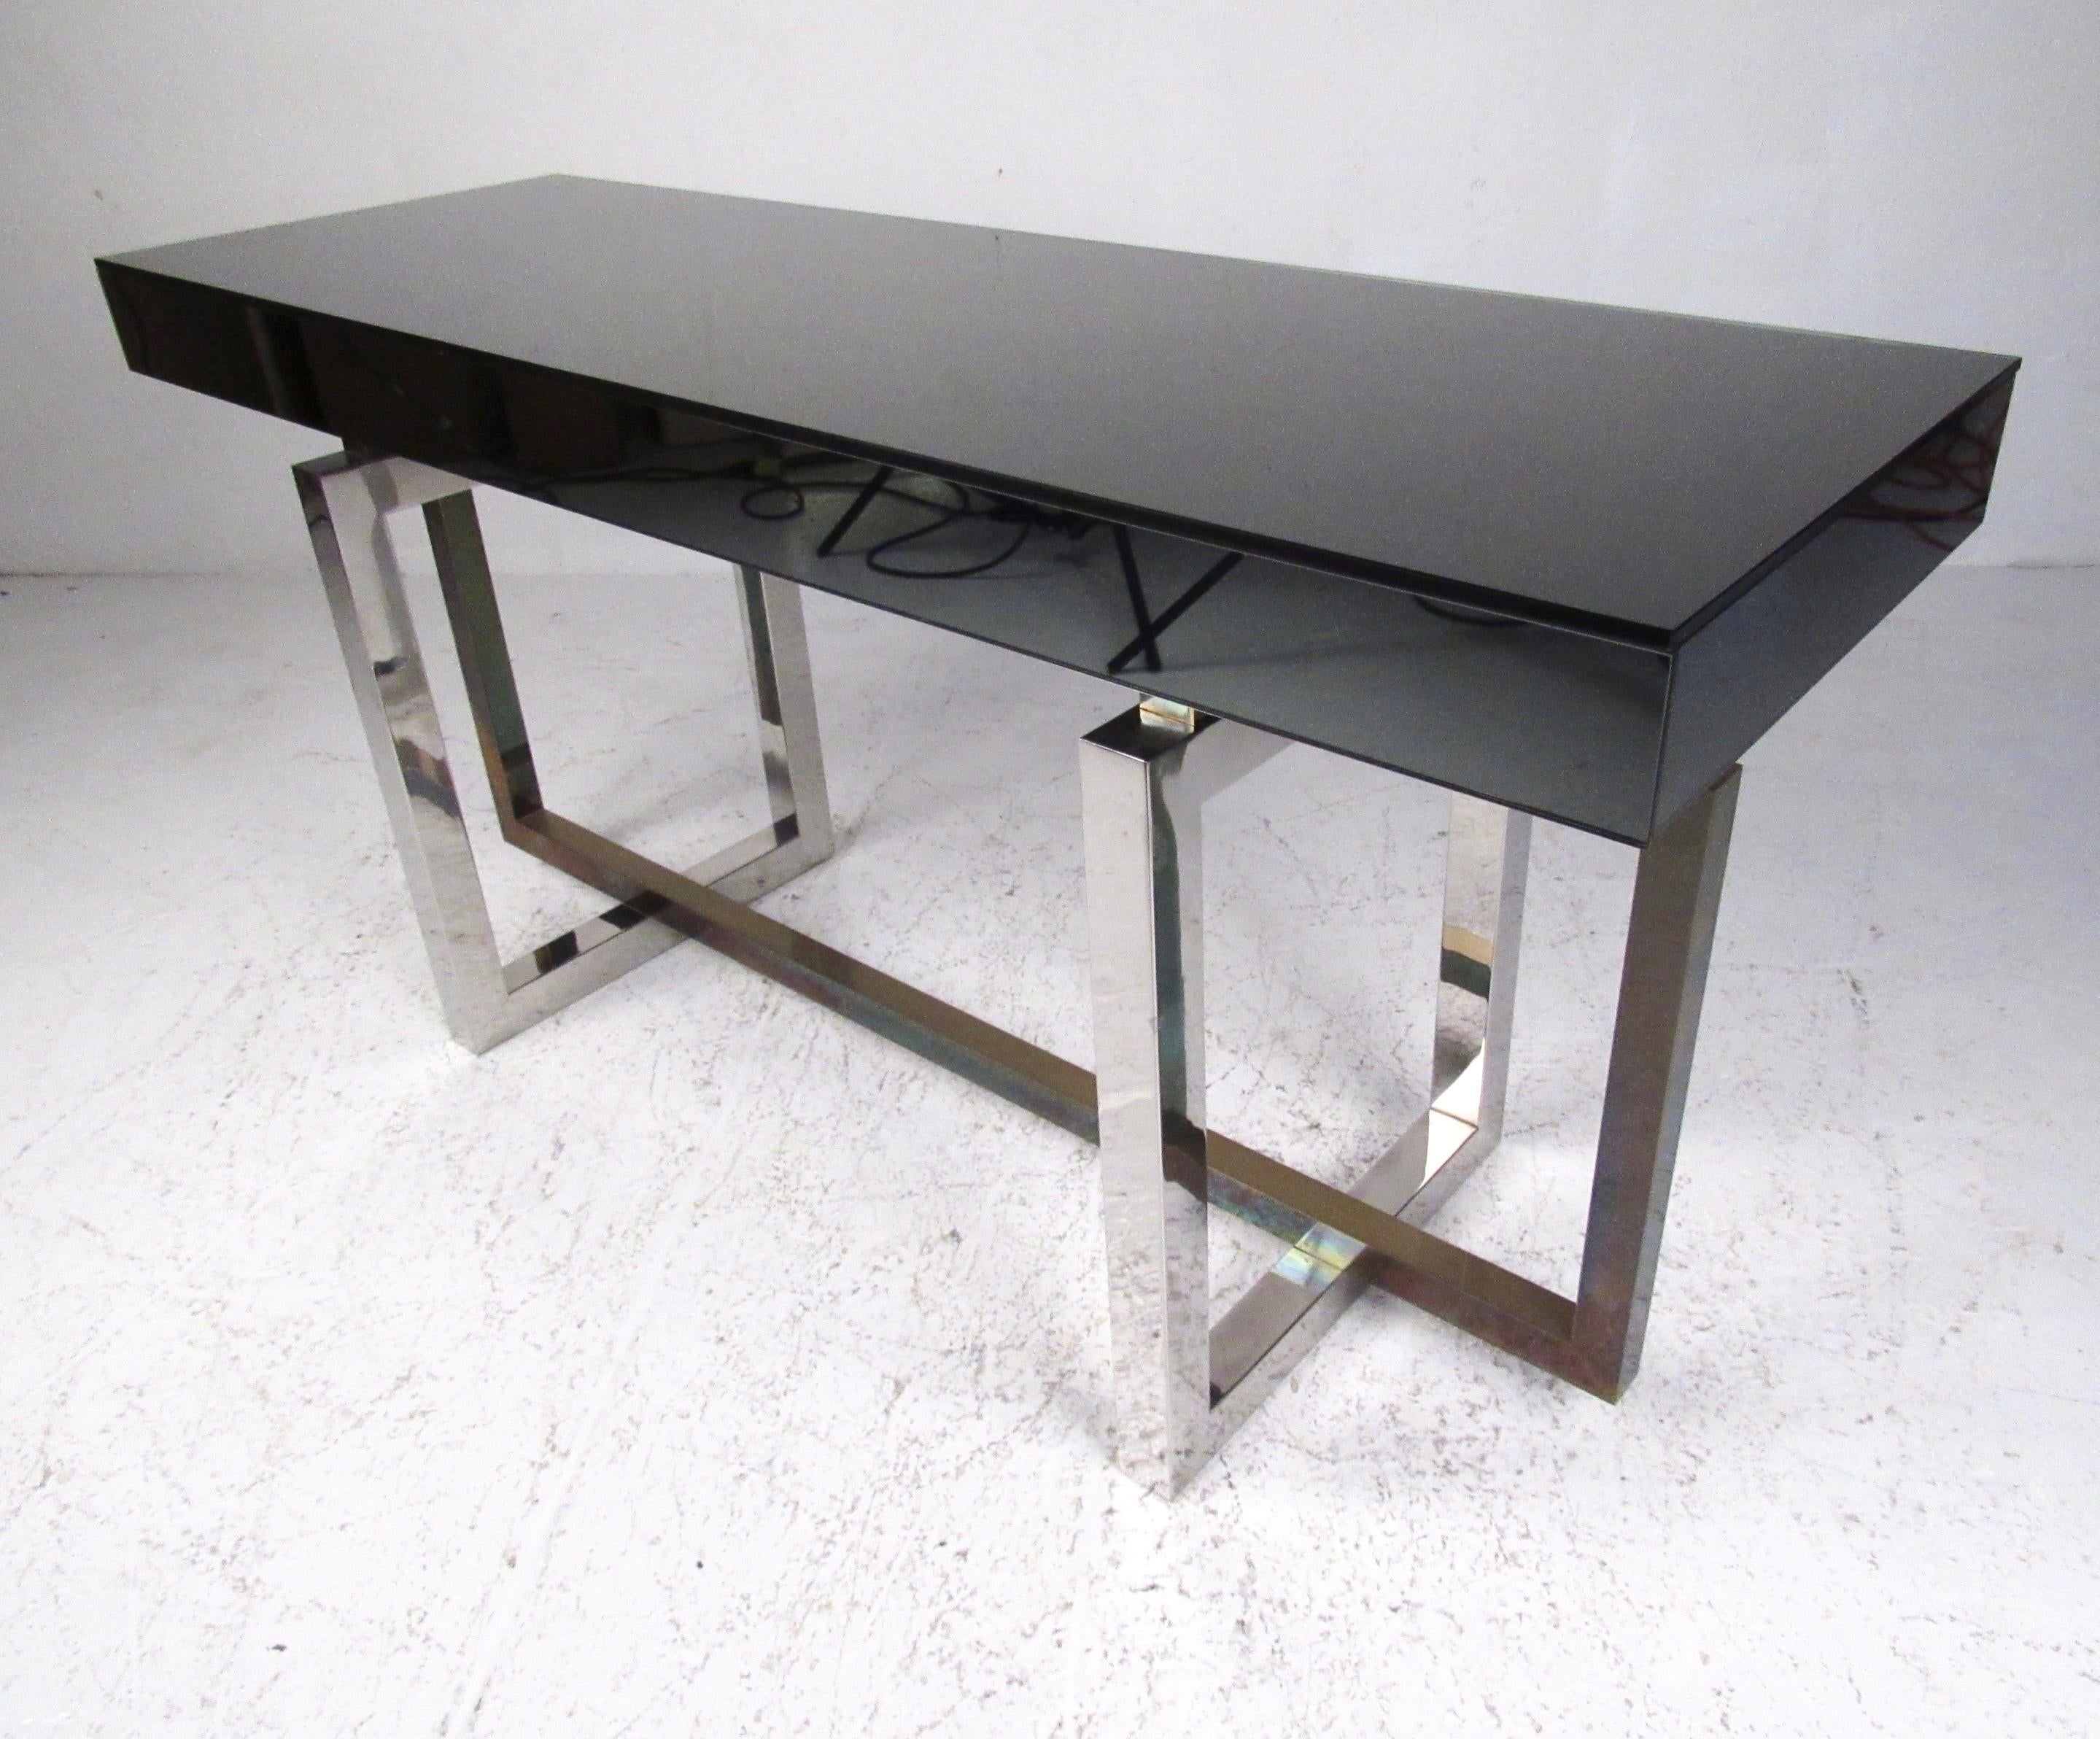 This stylish modern console table features mirrored finish with a stylish mixed metal base. The mis of mirror and oxidized brass finish add to the impressive appeal of this floating top hall or sofa table. Please confirm item location (NY or NJ).